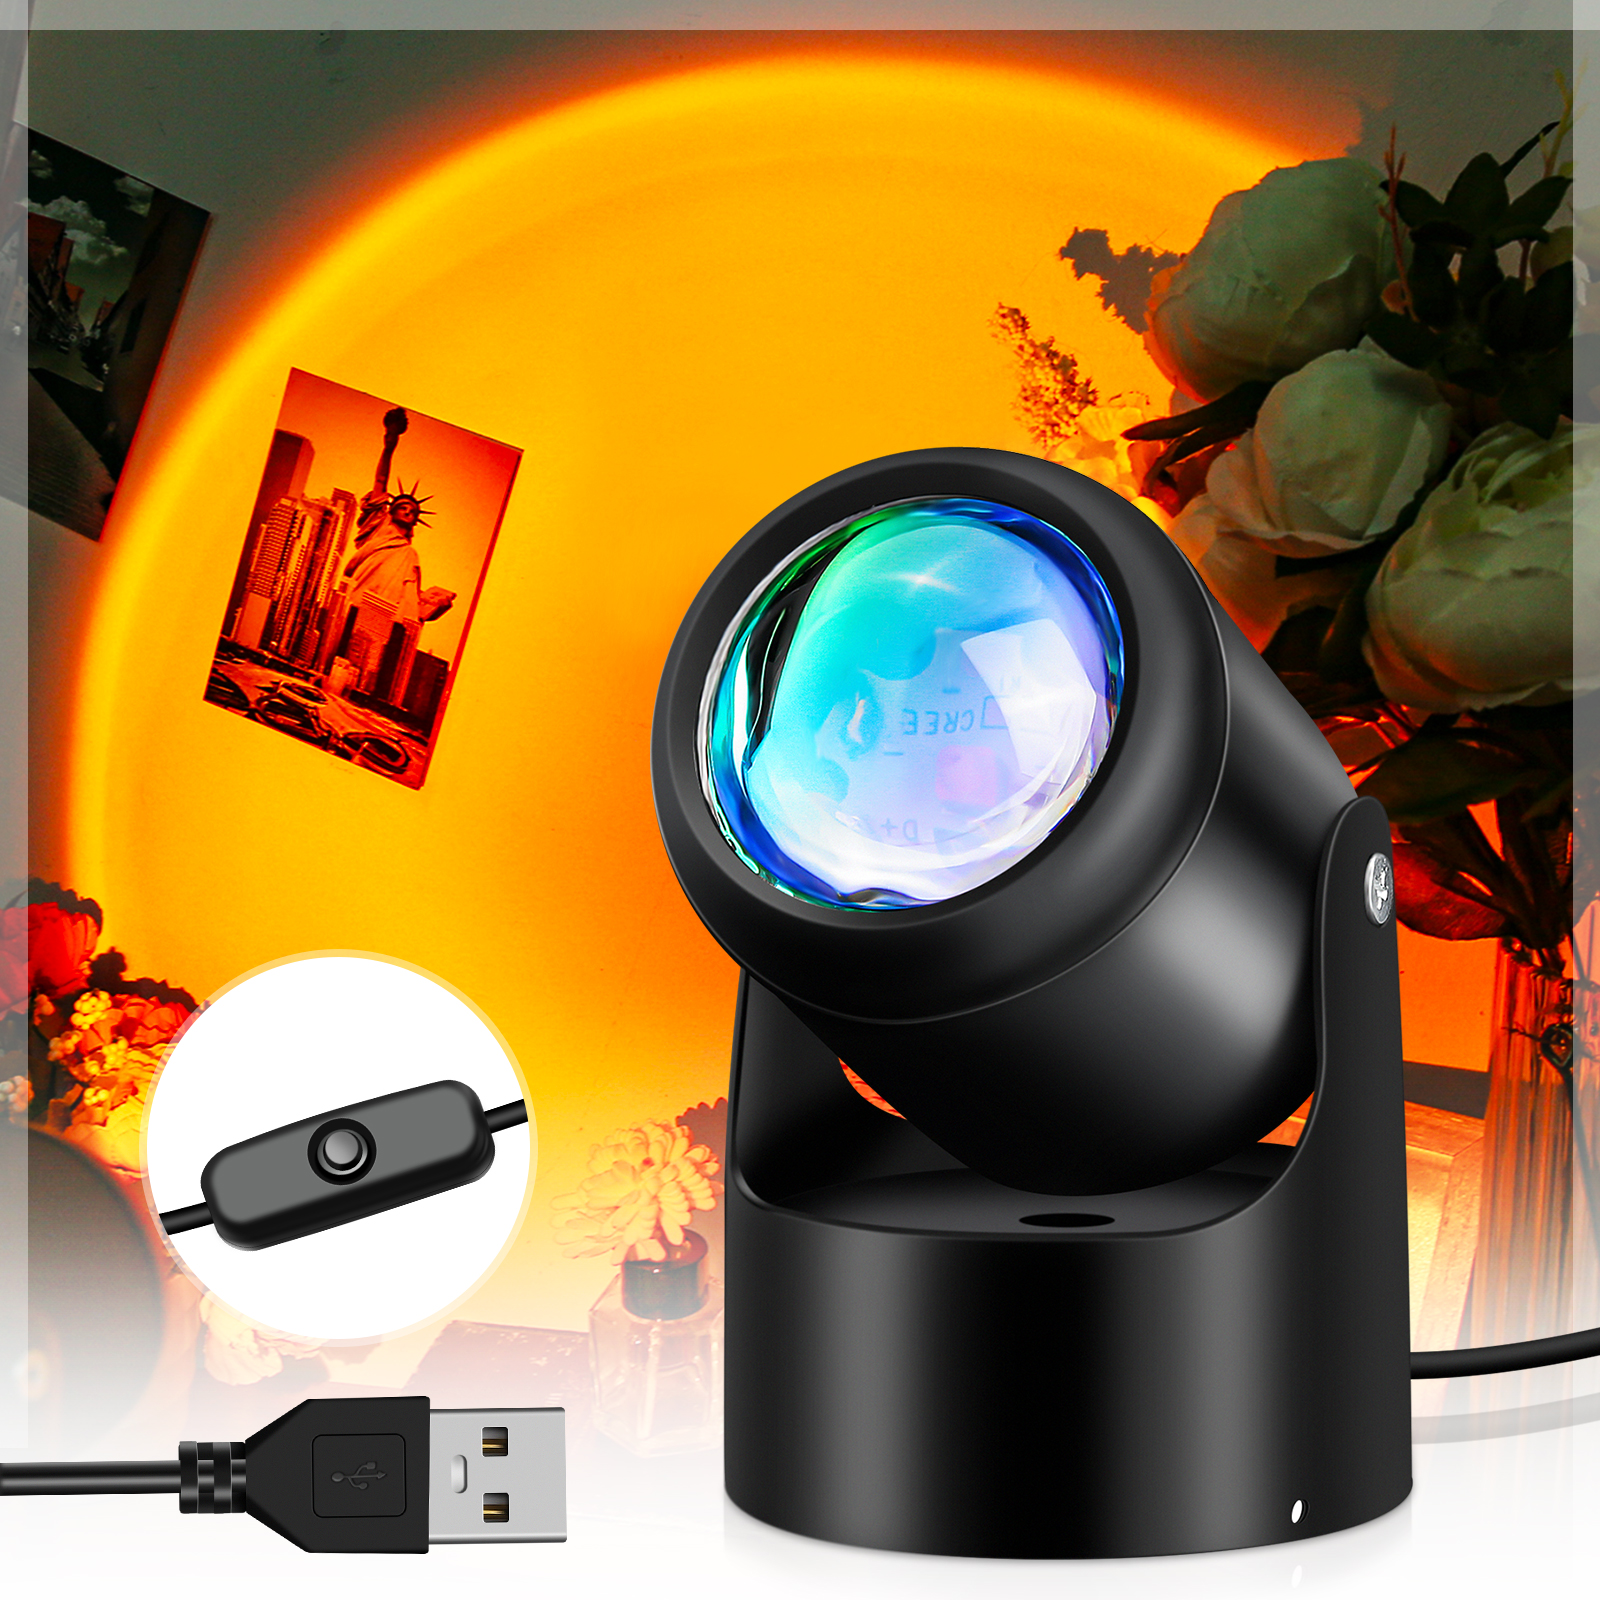 CHARMINER 180° Rotation Sunset Projection LED Light Sunset Decor Photographic USB Night Light for Bedroom Living Room Home Party